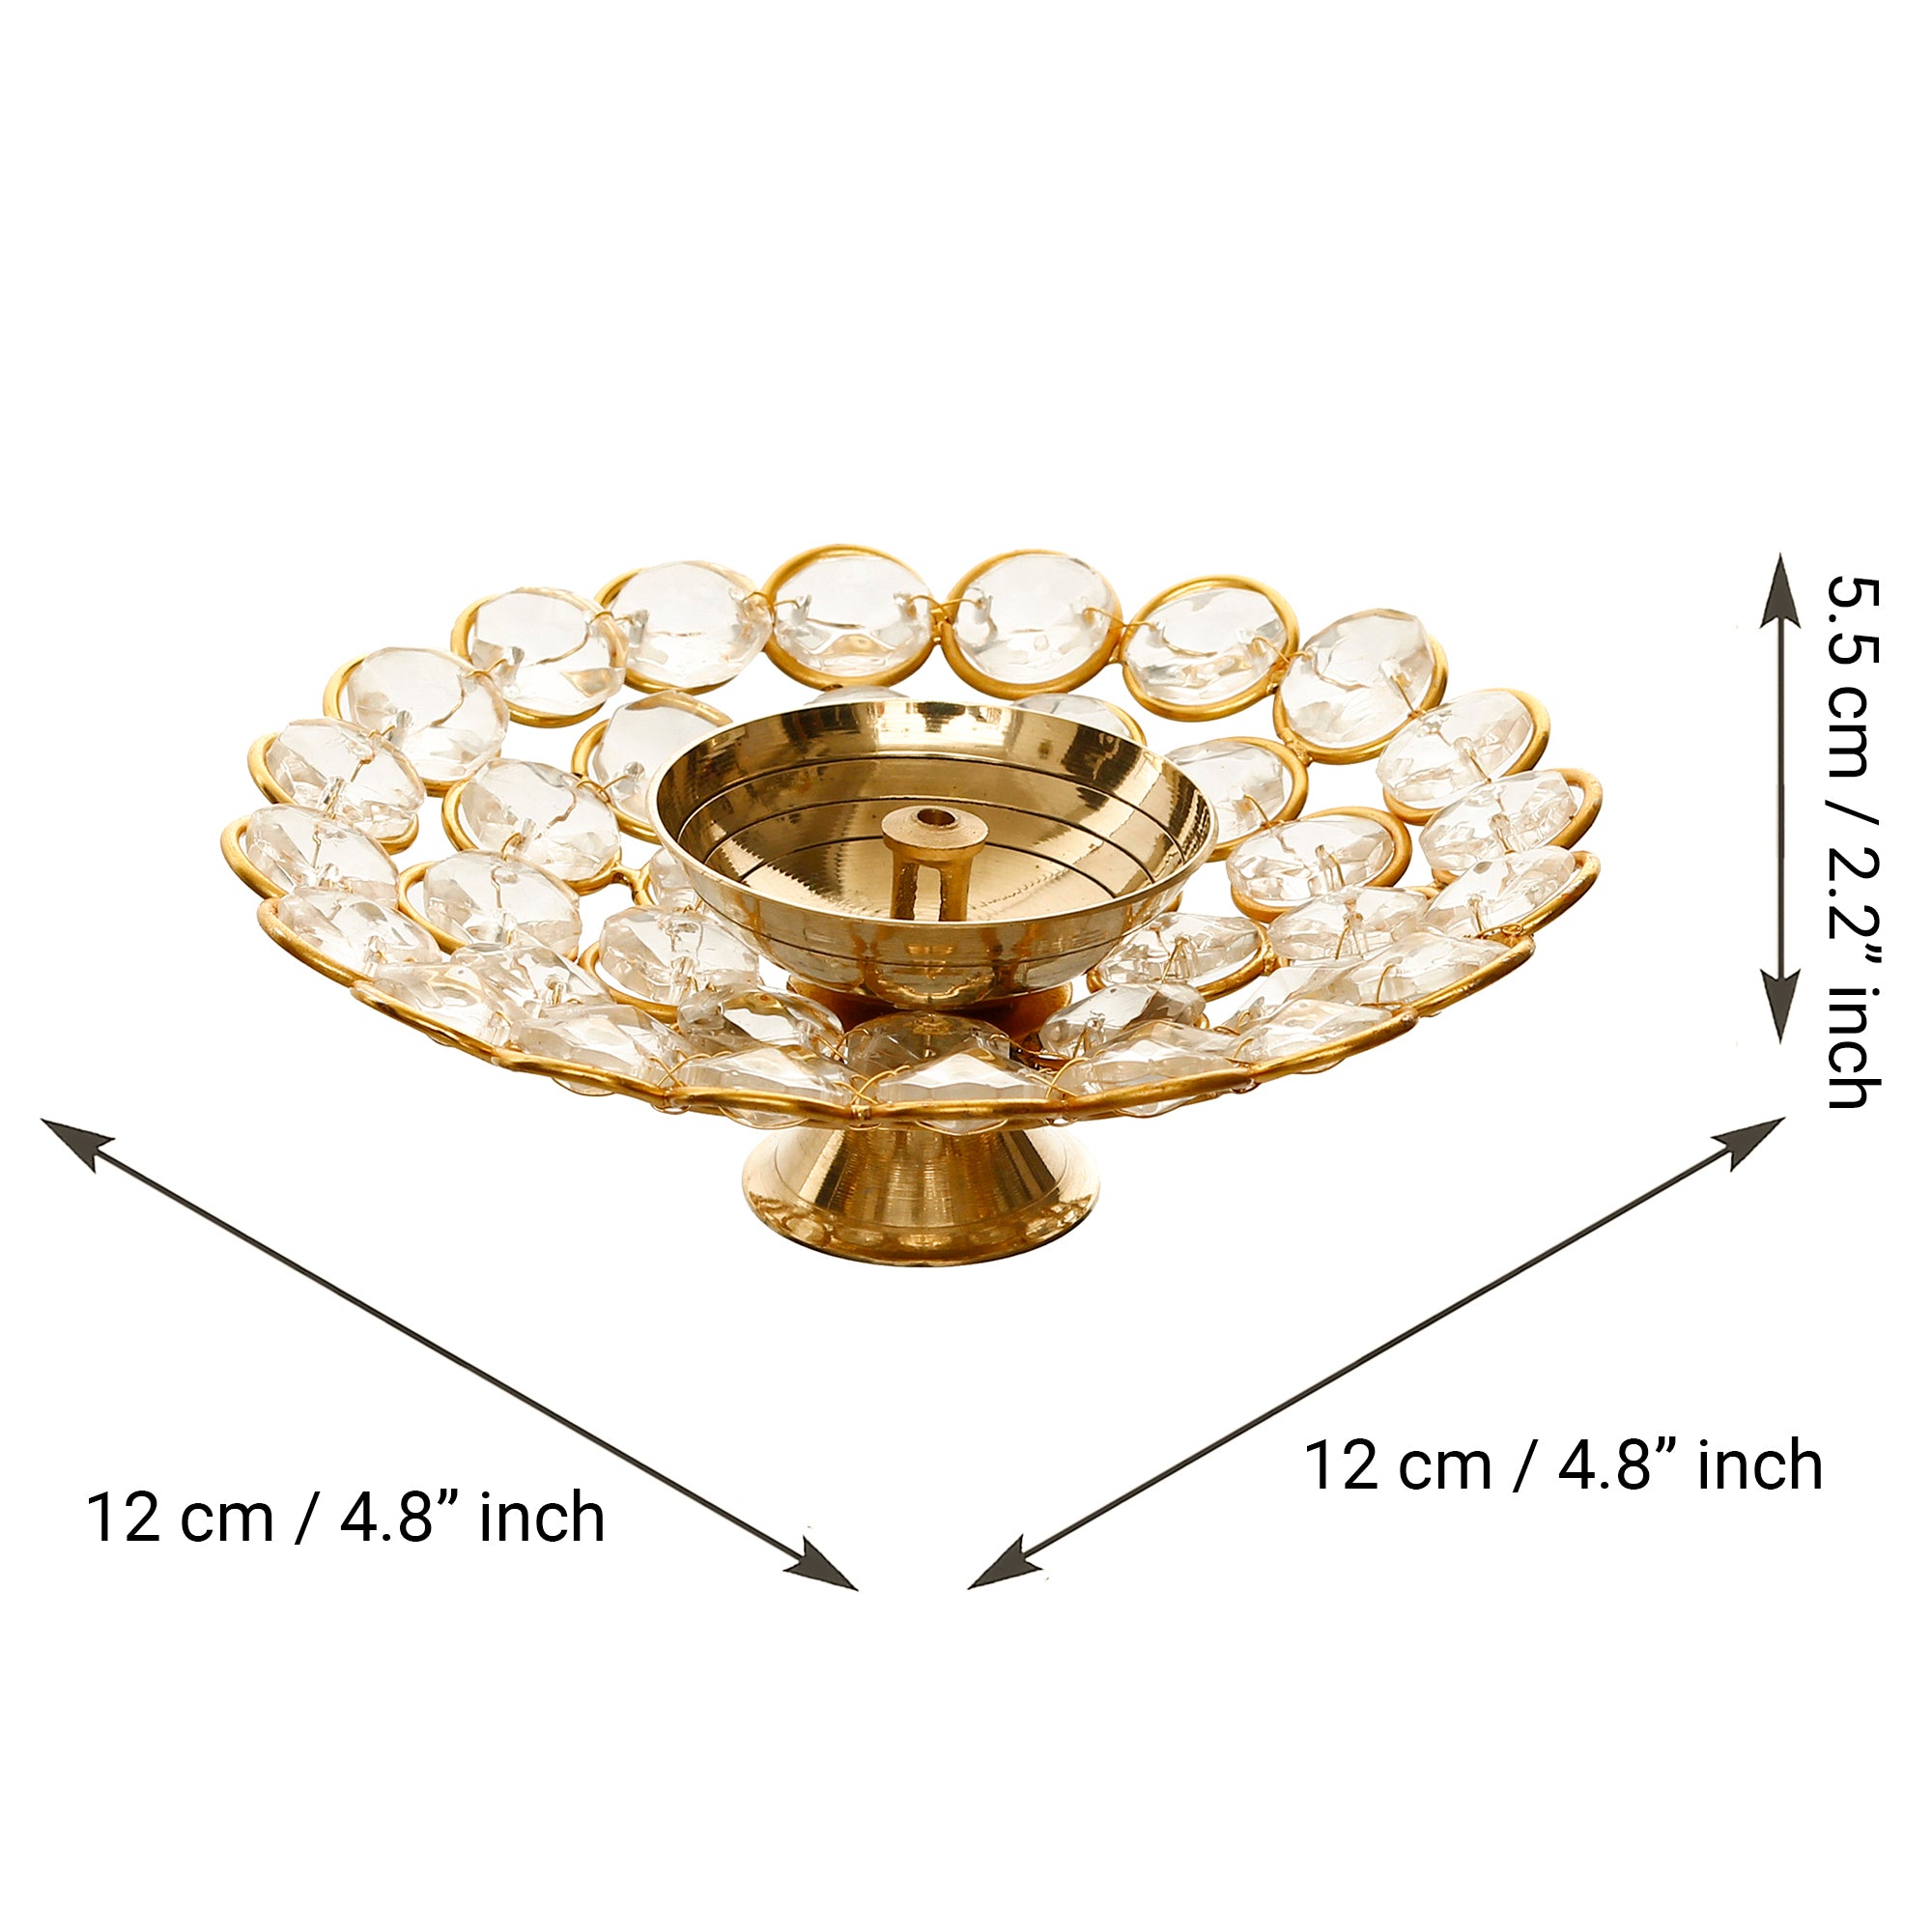 White and Gold Bowl Shape Small Crystal Tea Light Holder 3